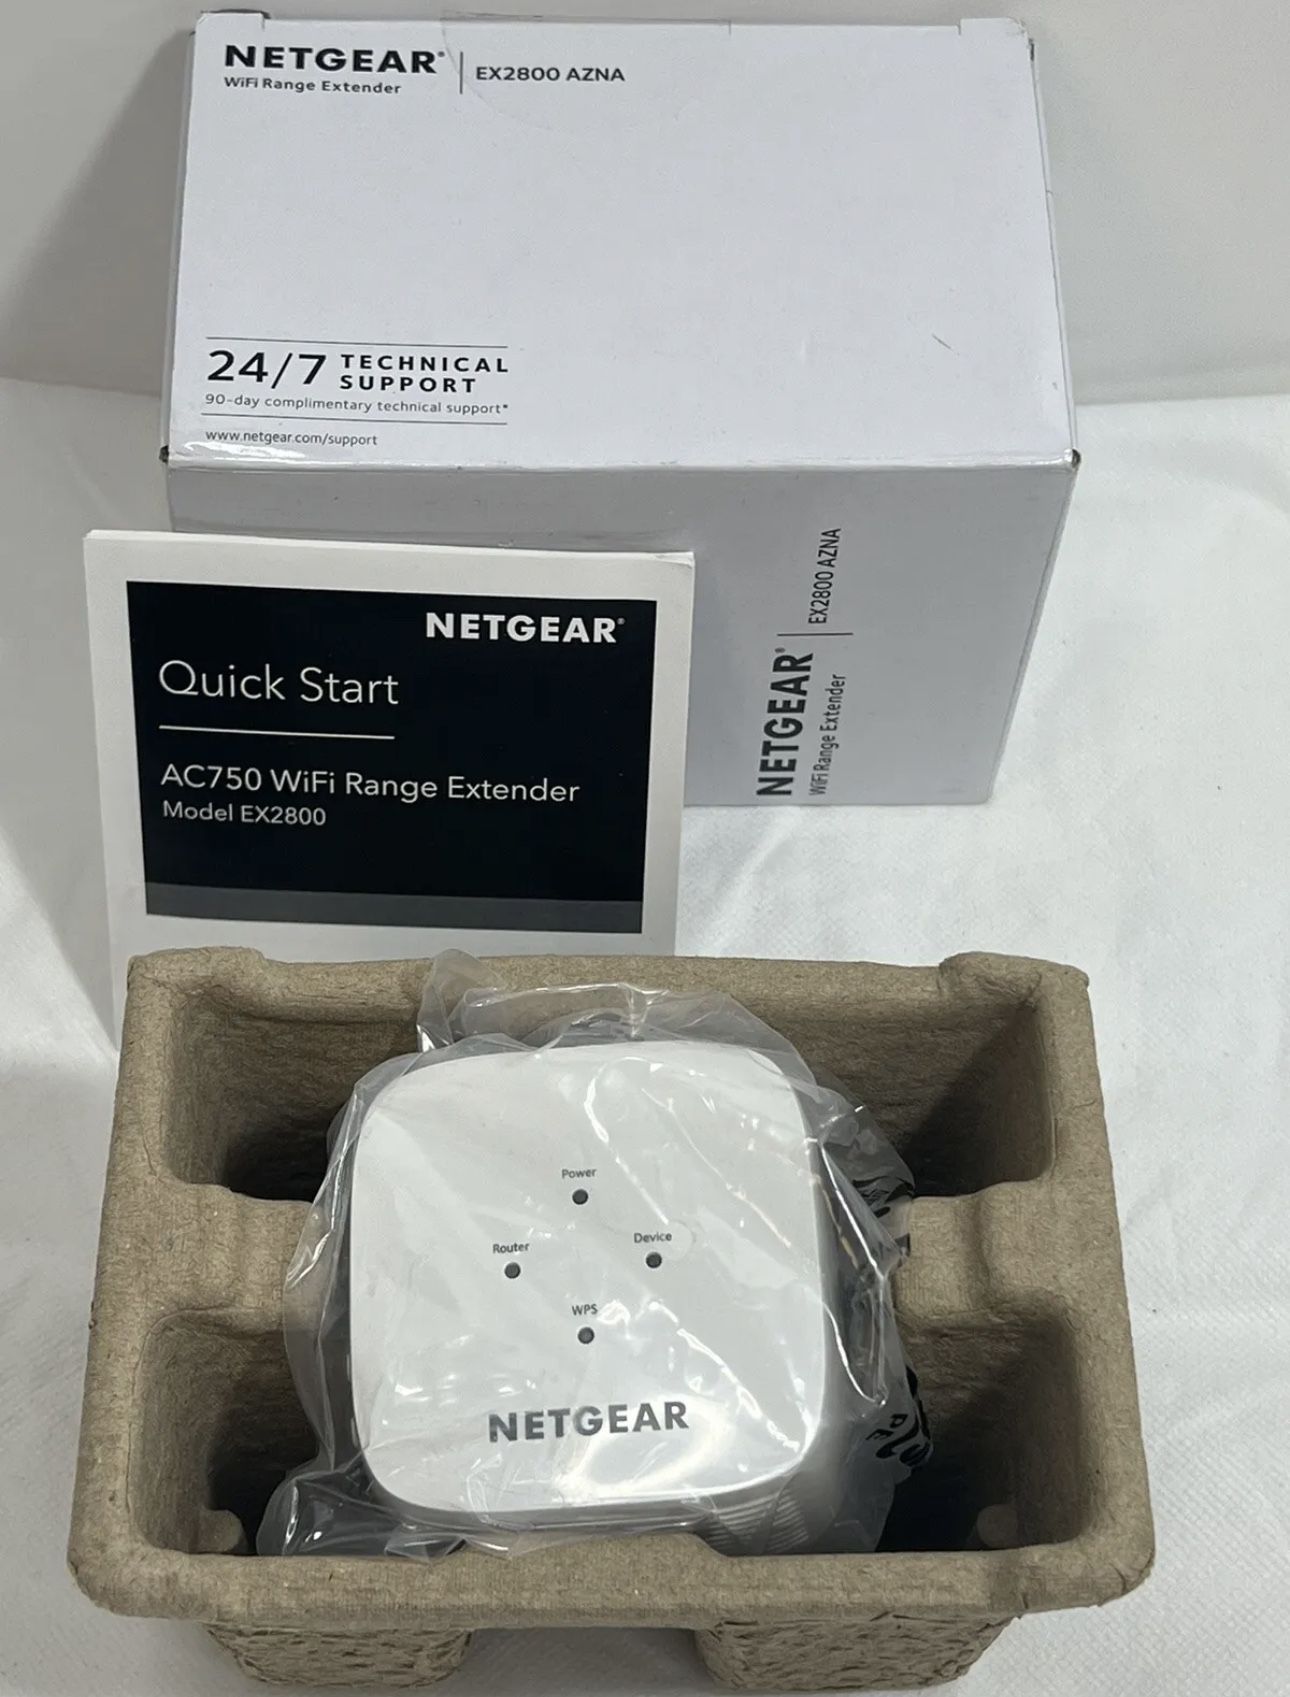 NETGEAR WI-FI Range Extender EX2800-Coverage up to 1200sqft & 20 Devices 